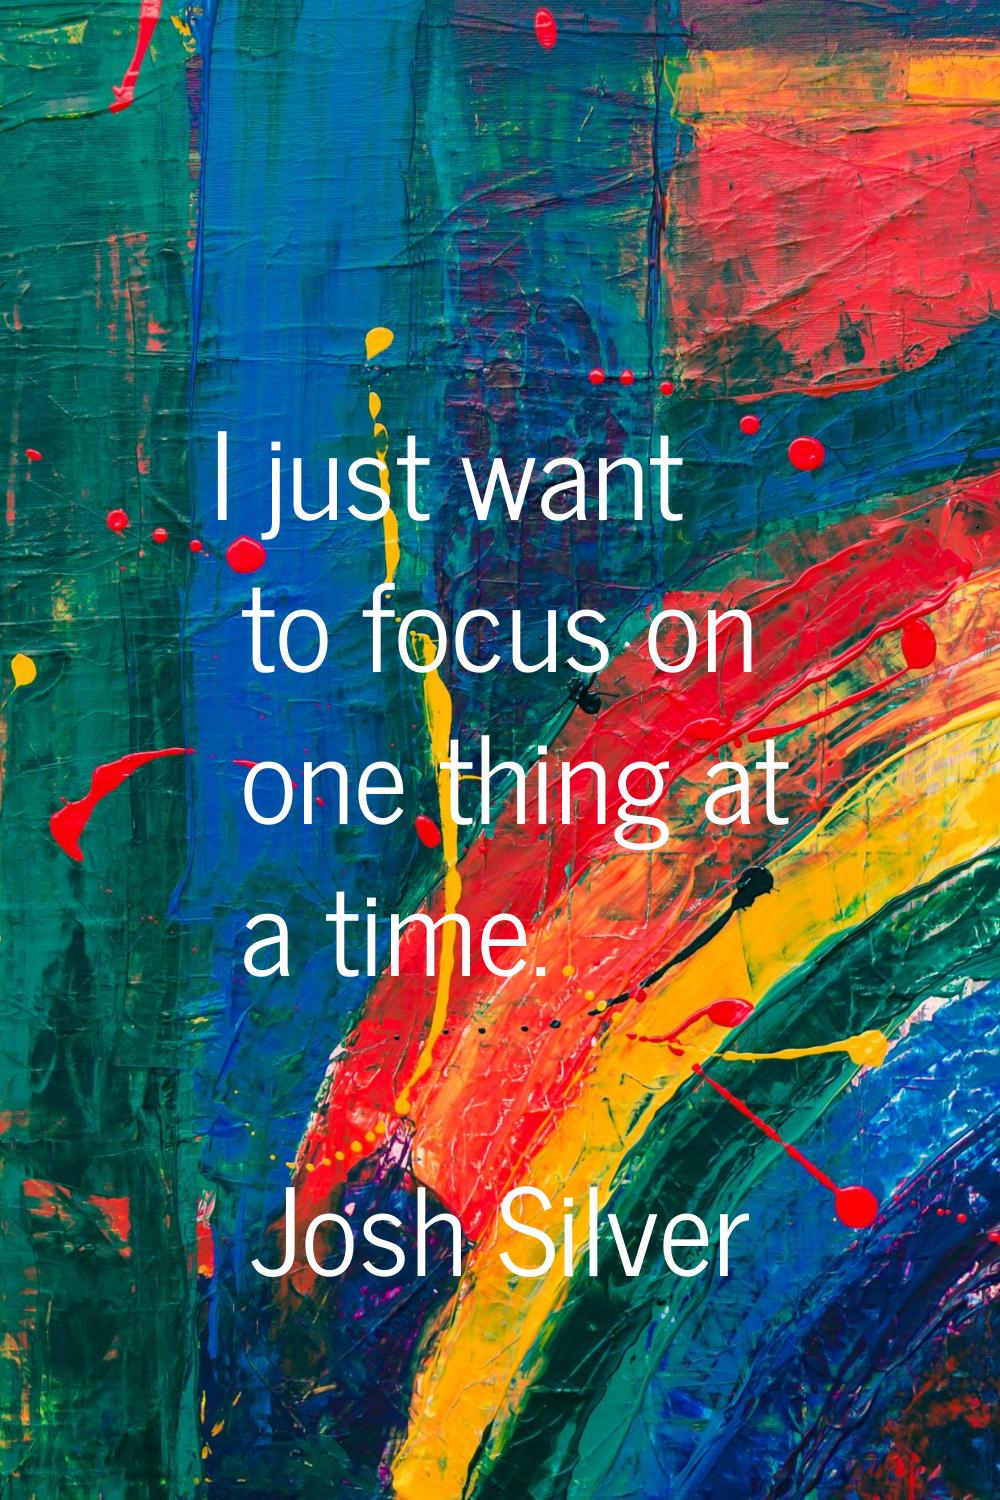 I just want to focus on one thing at a time.